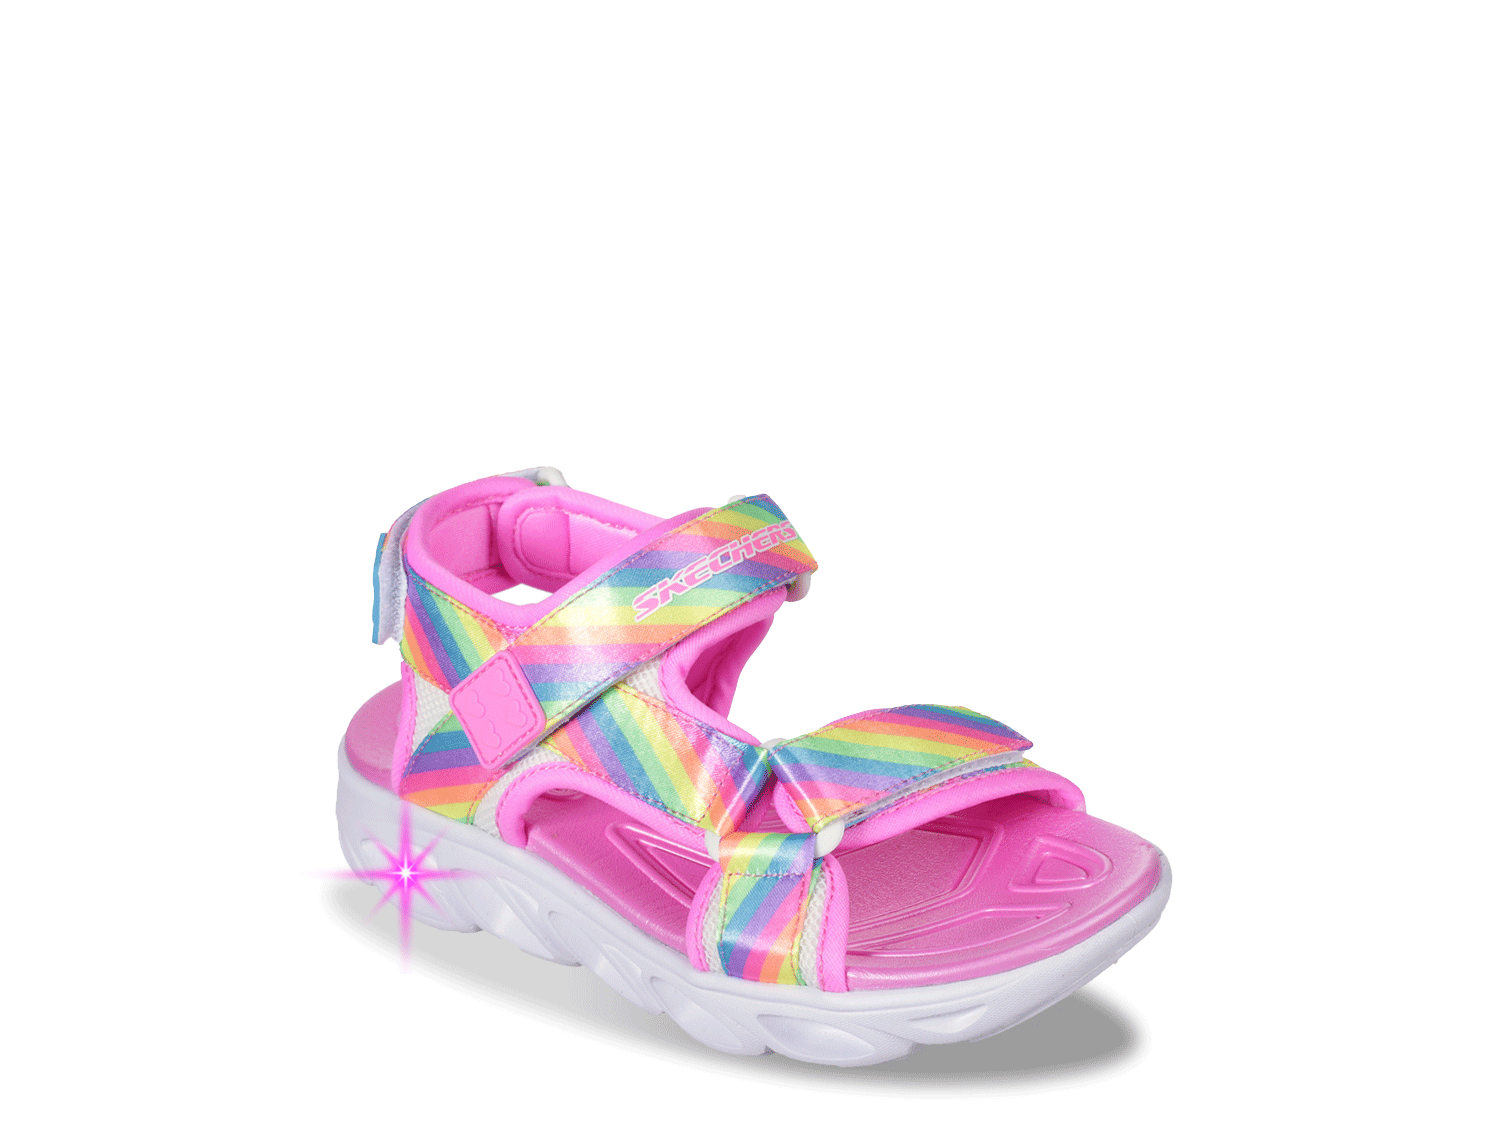 skechers sandals for toddlers